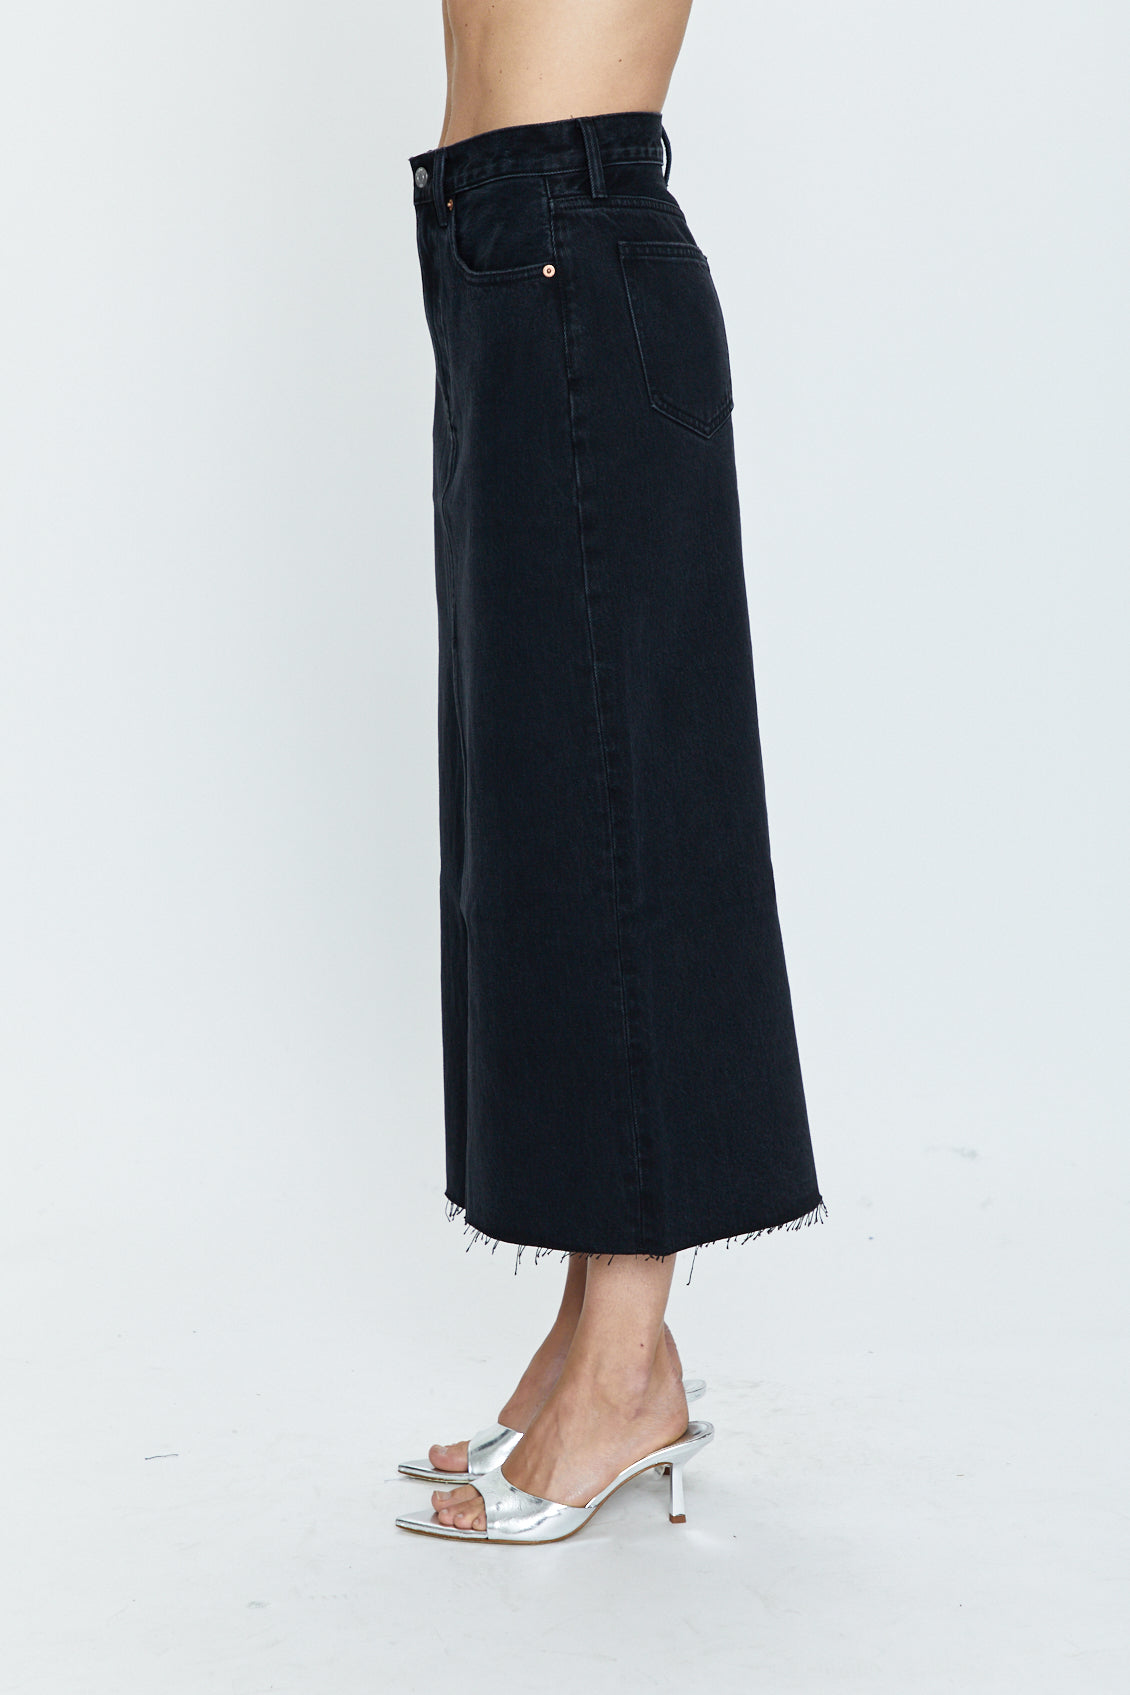 Pistola  Alice High Rise Midi Skirt - Brooklyn - Tryst Boutique